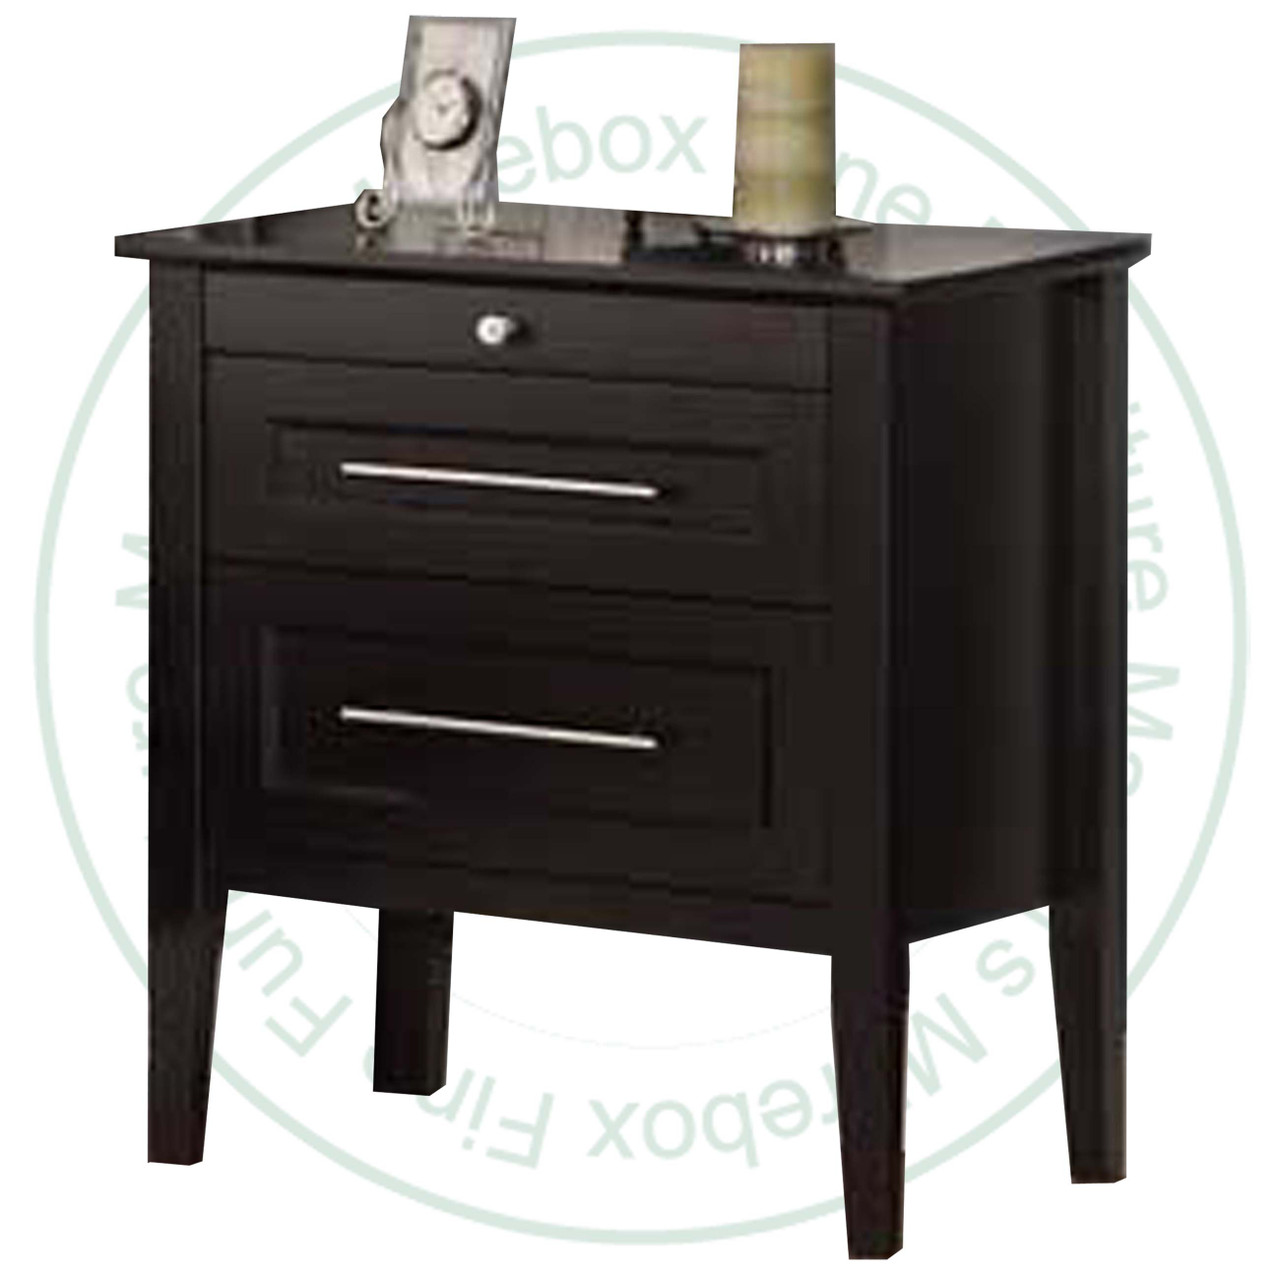 Oak Stockholm Nightstand 19''D x 25''W x 29.5''H With 2 Drawers And Pullout Shelf